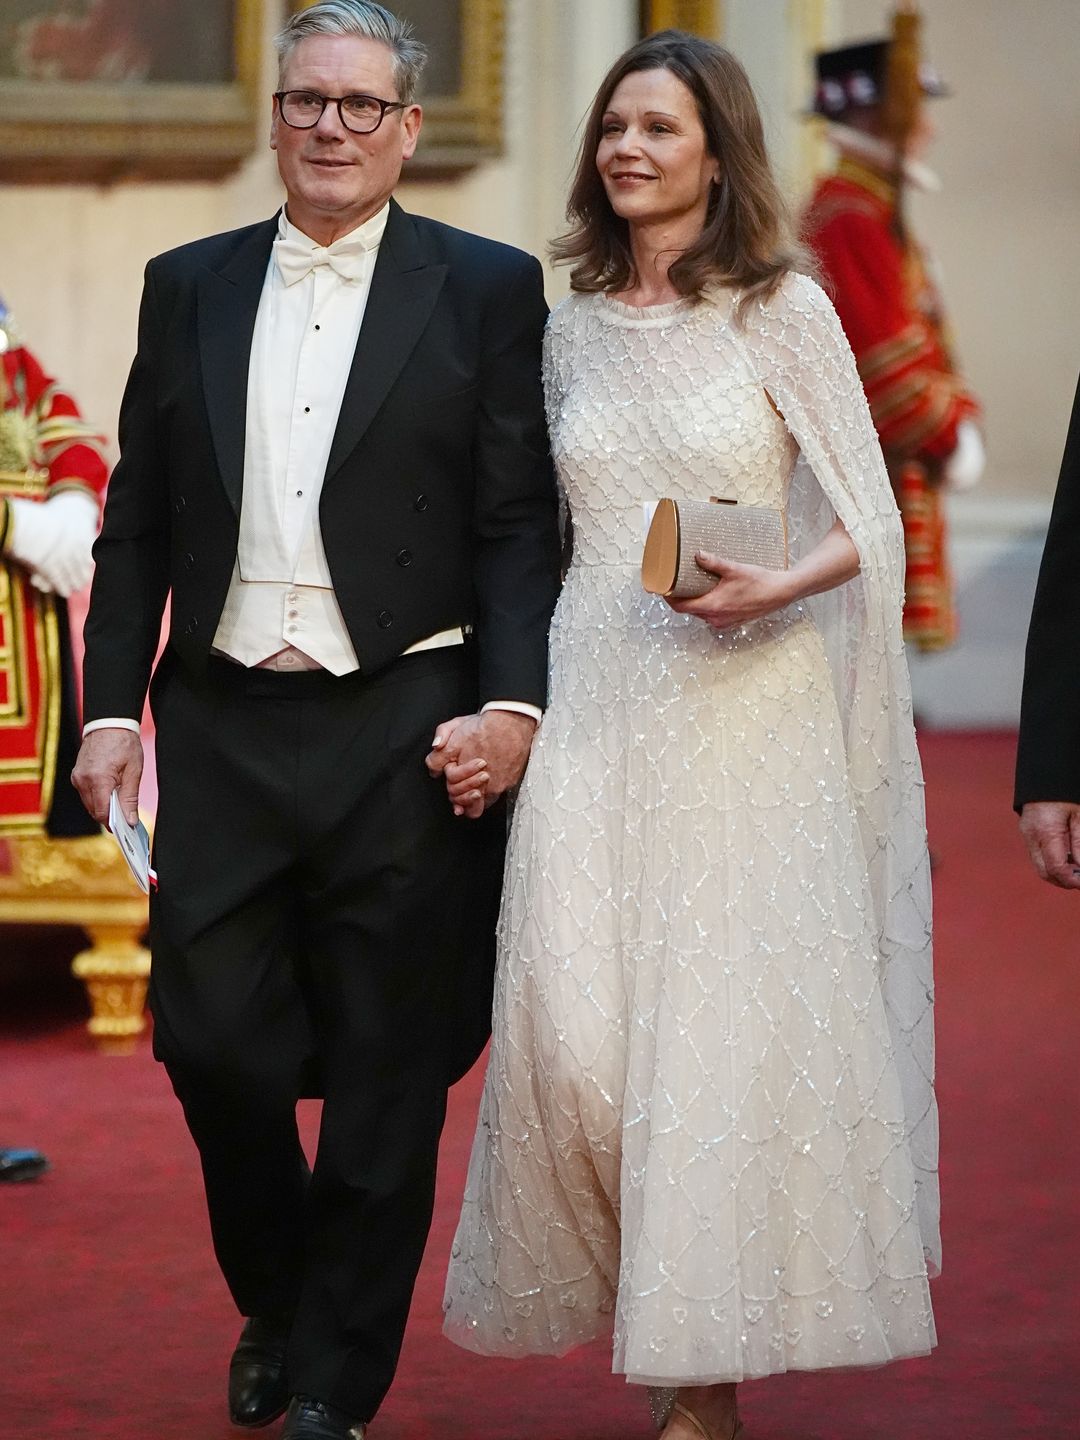  Keir Starmer with his wife Victoria at the State Banquet